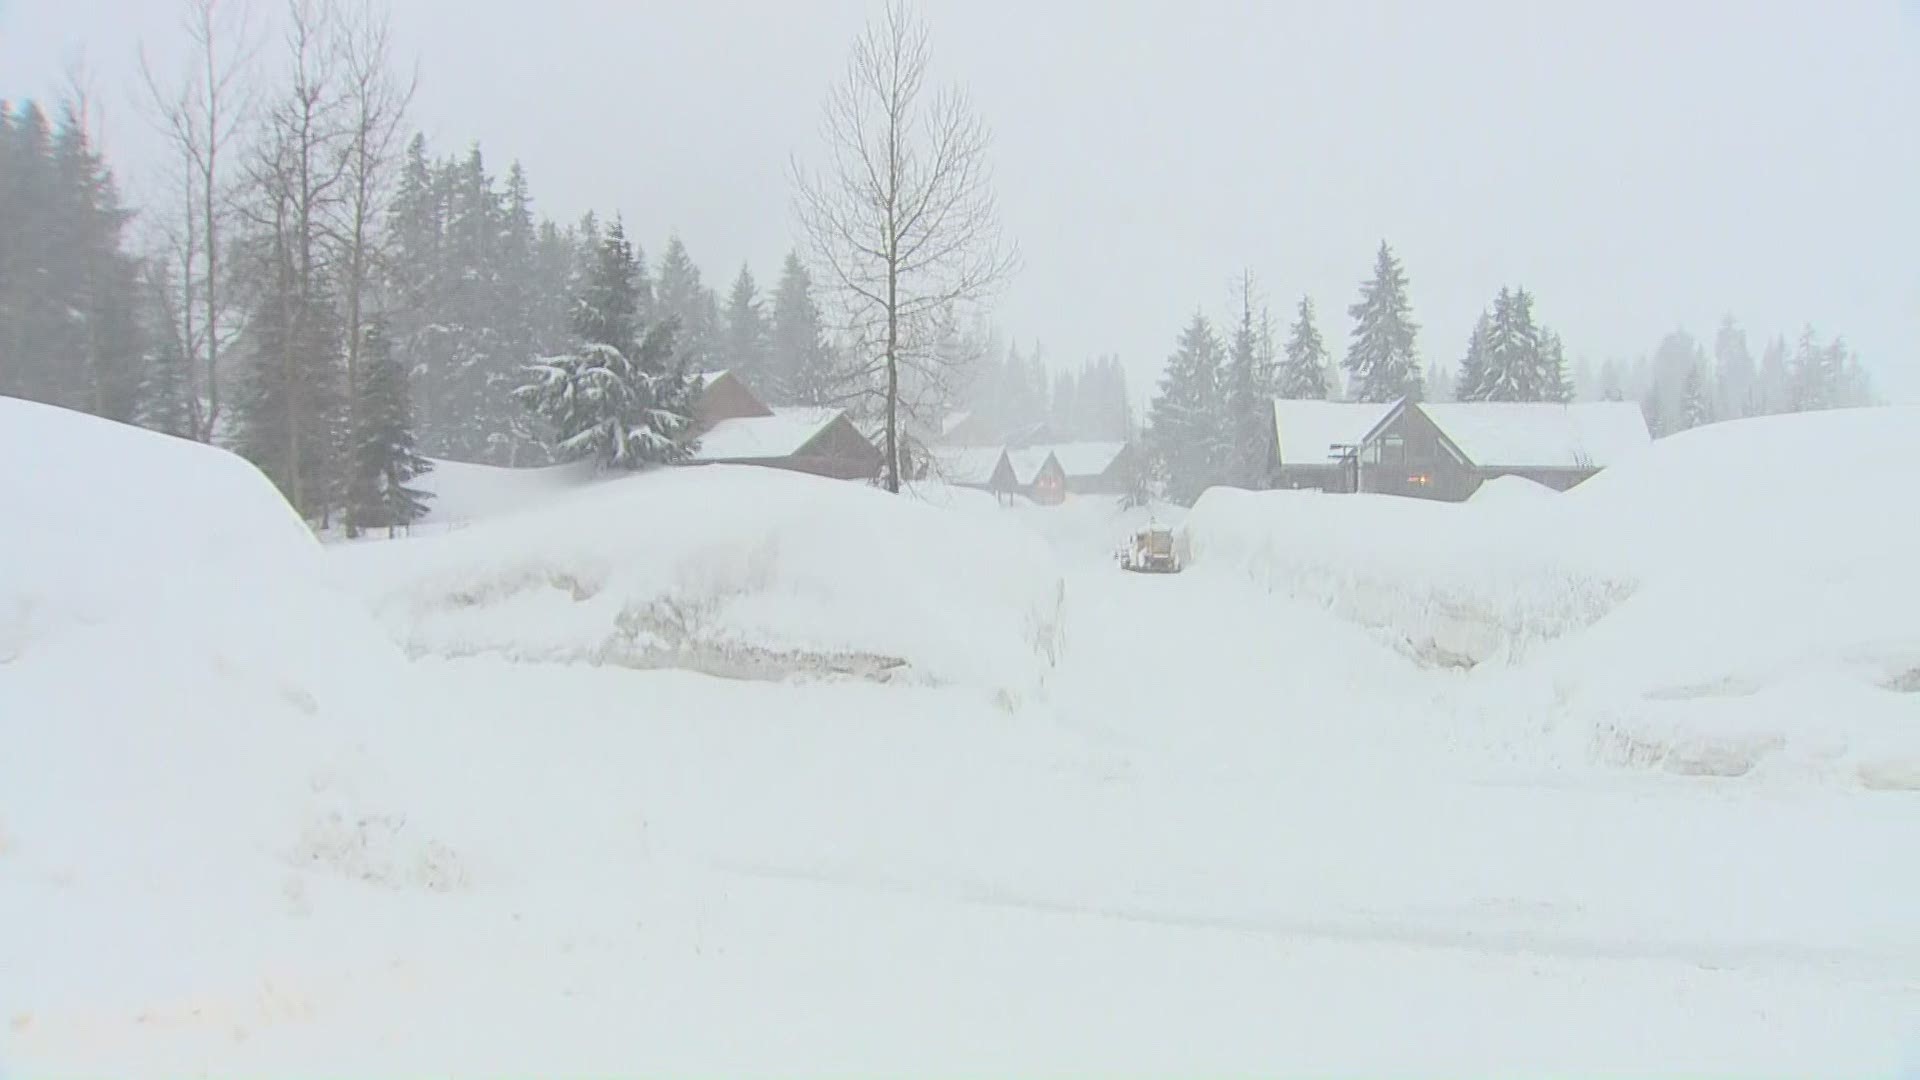 Driving over Snoqualmie Pass is treacherous on Friday after a rain and snow mix hit overnight.